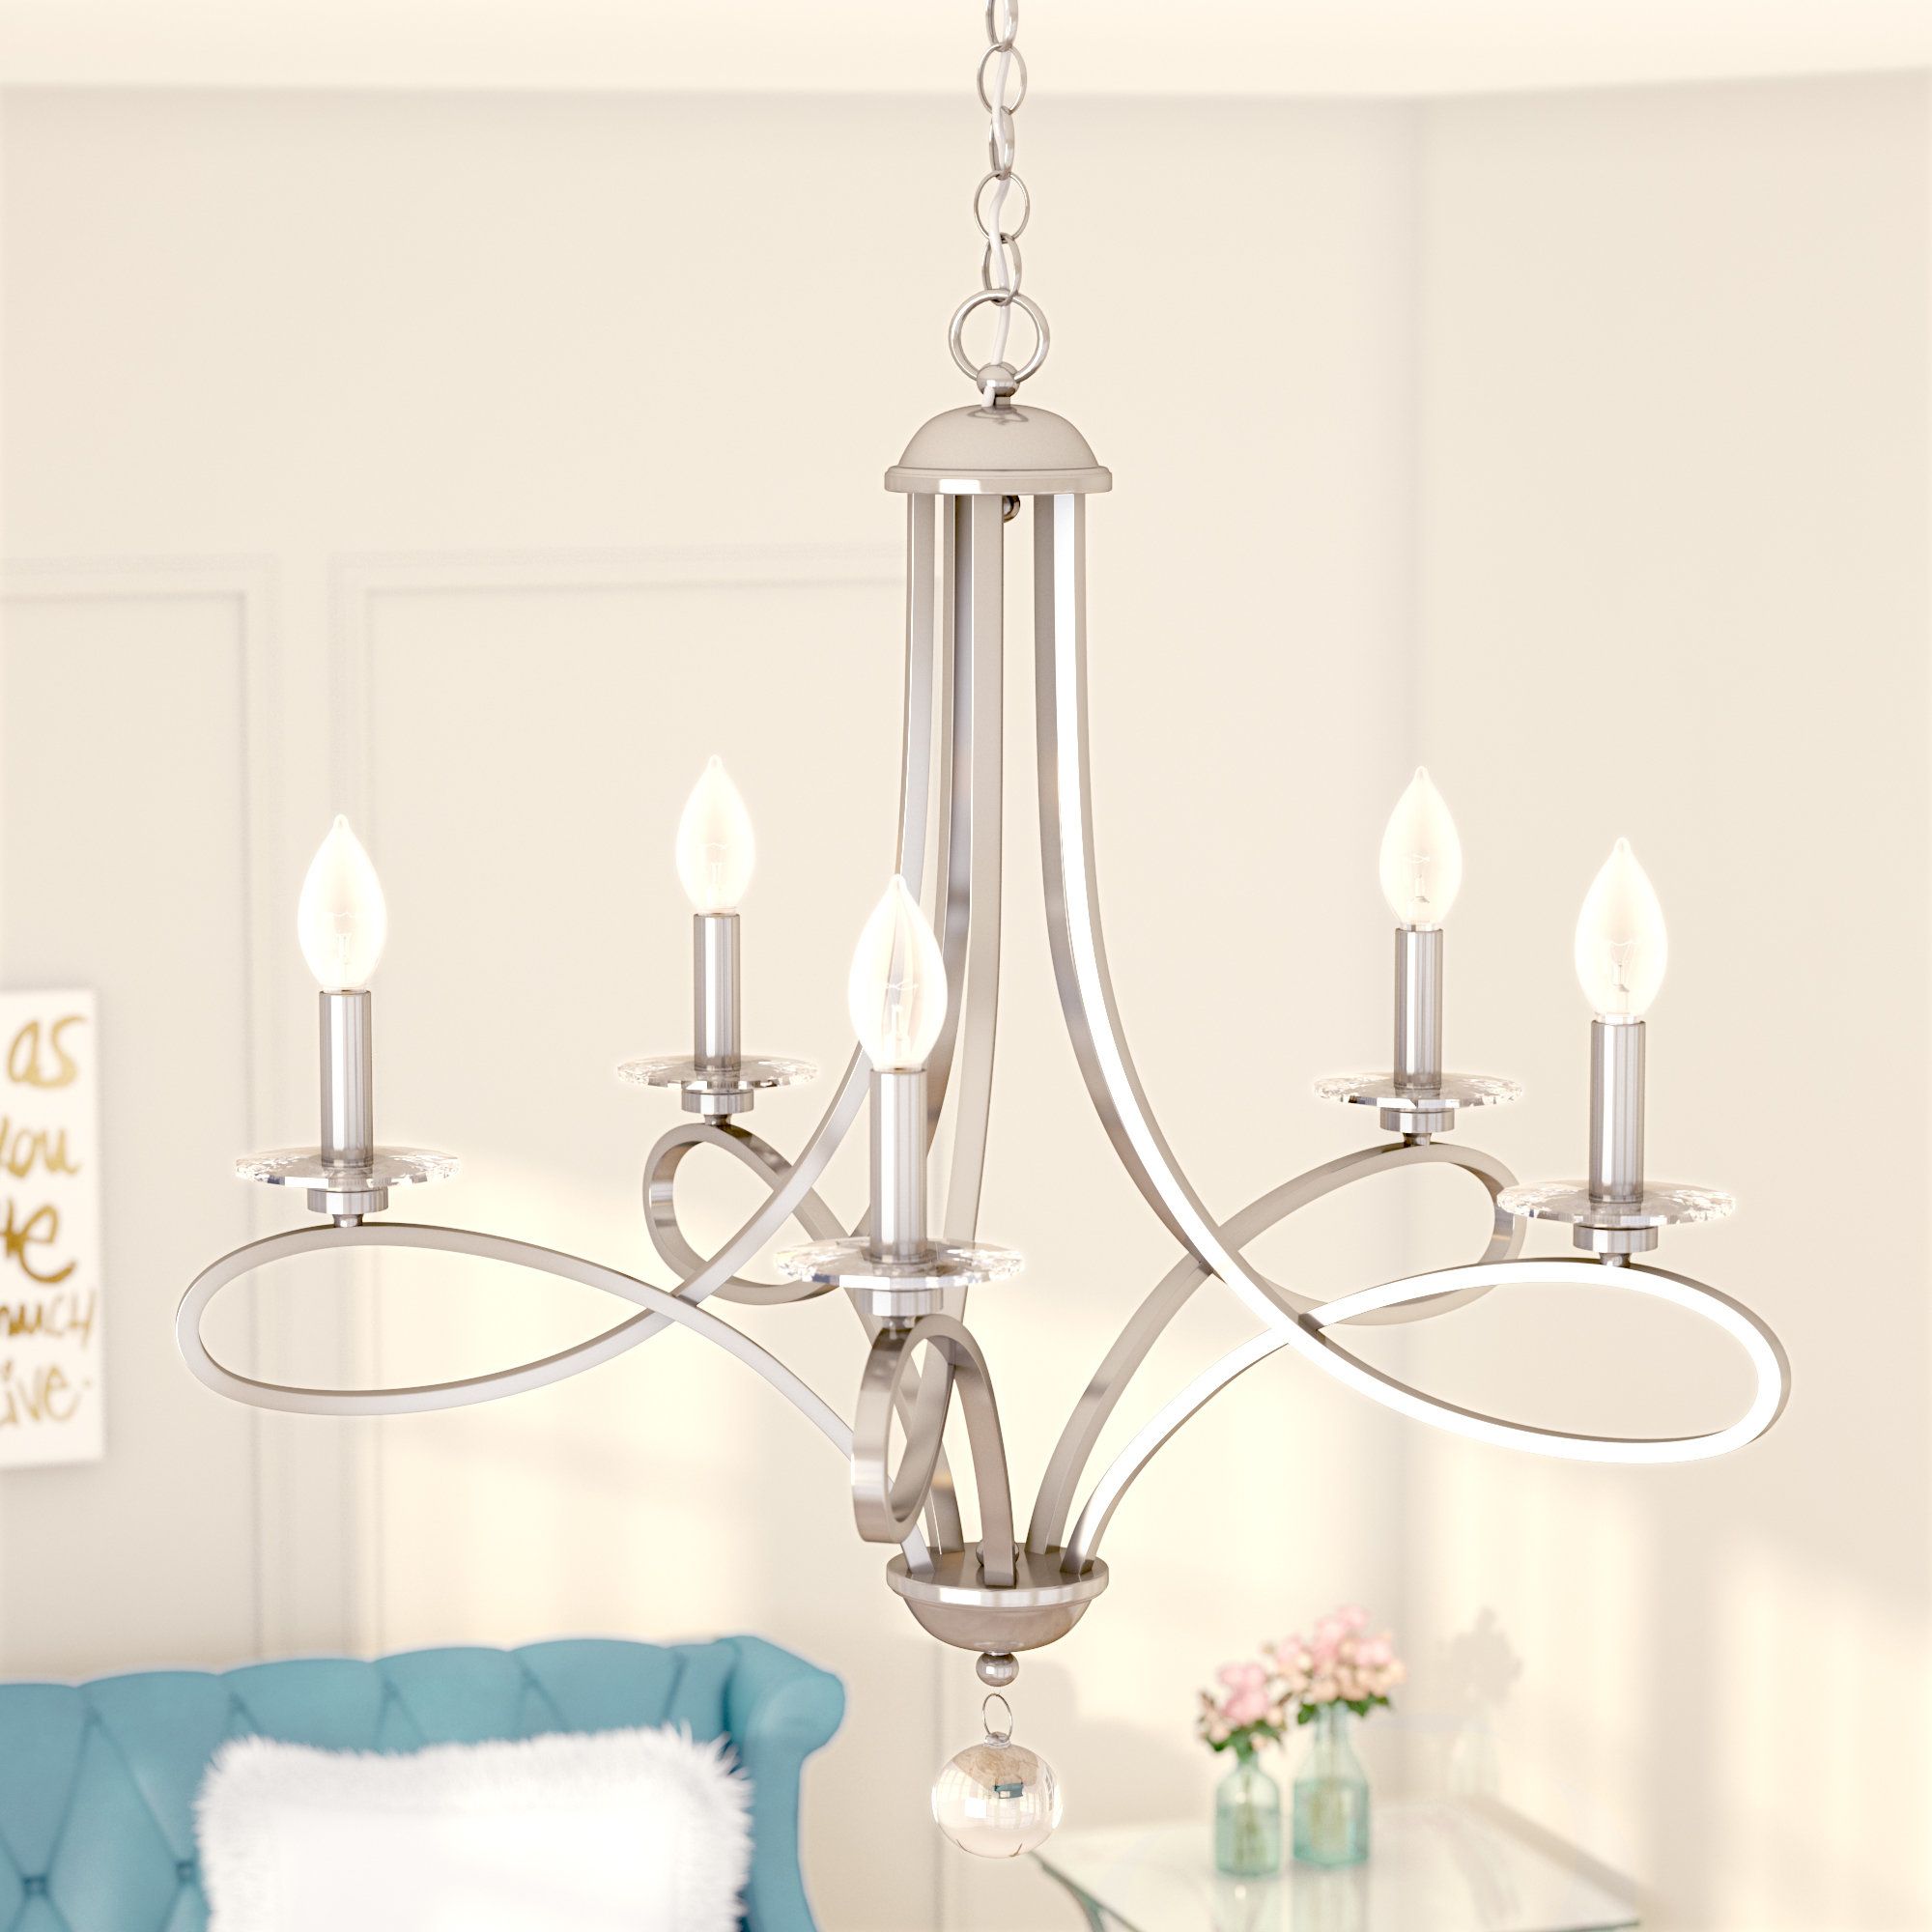 Berger 5 Light Candle Style Chandelier With Regard To Berger 5 Light Candle Style Chandeliers (View 1 of 30)